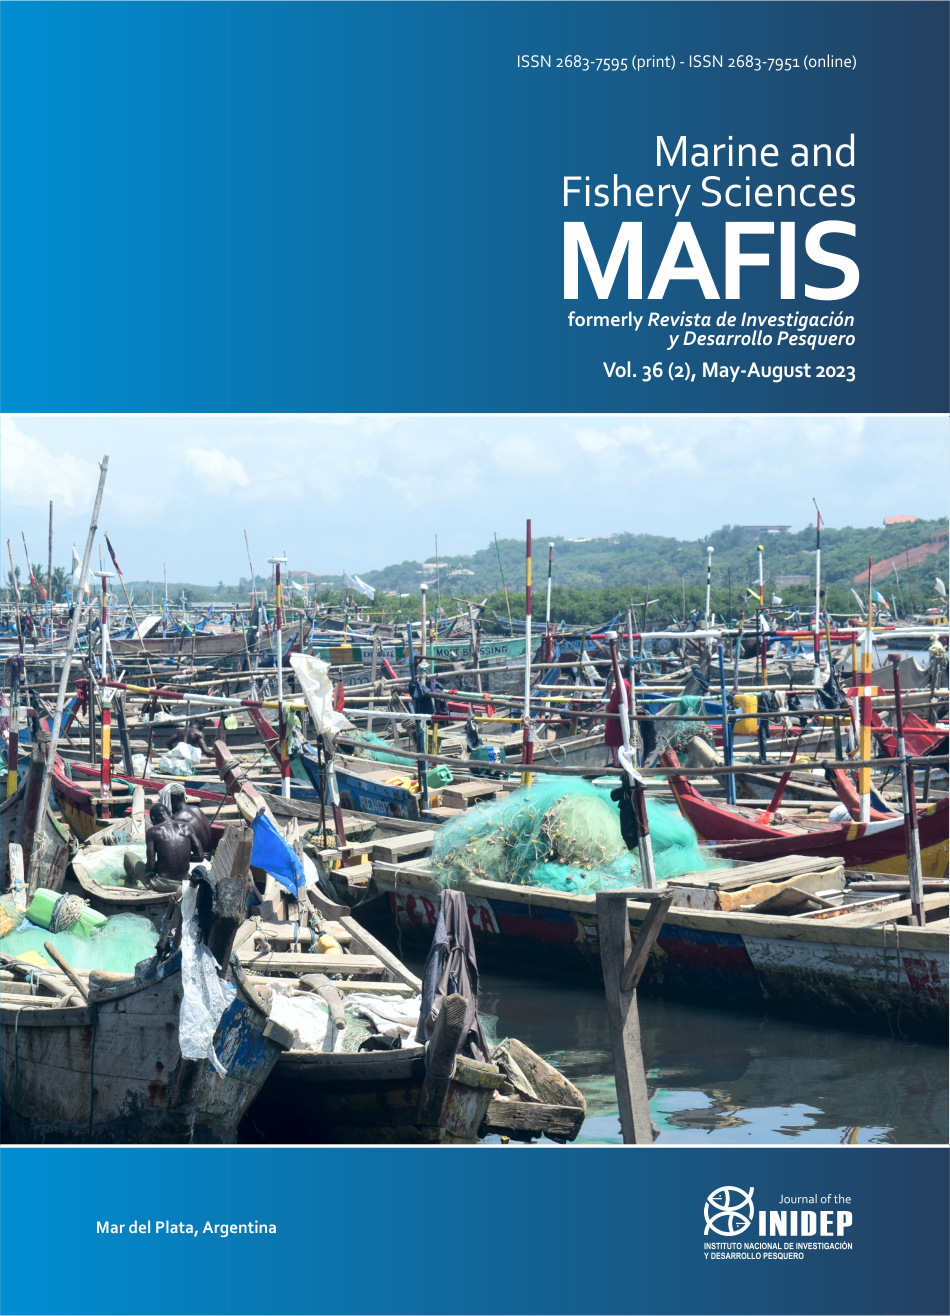 					View Vol. 36 No. 2 (2023): Marine and Fishery Sciences (MAFIS) - Accepted Articles
				